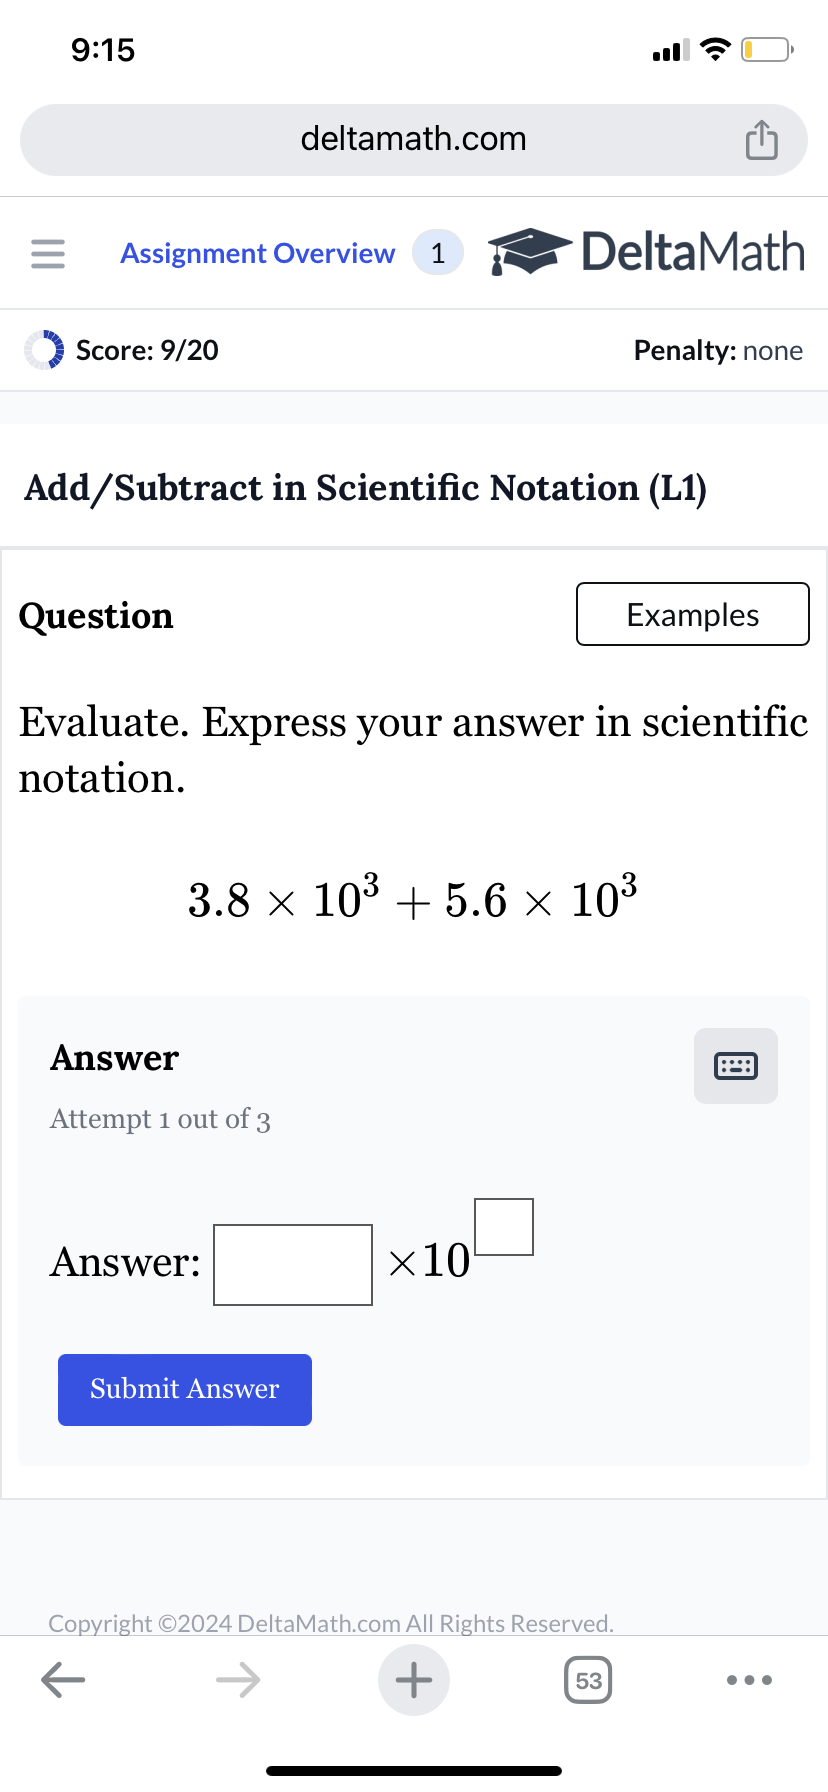 9:15
deltamath.com
= Assignment Overview 1
DeltaMath
Score: 9/20
Penalty: none
Add/Subtract in Scientific Notation (L1)
Question
Examples
Evaluate. Express your answer in scientific
notation.
3.8 × 103 +5.6 × 10³
Answer
Attempt 1 out of 3
Answer:
Submit Answer
×10
Copyright ©2024 DeltaMath.com All Rights Reserved.
←
+
53